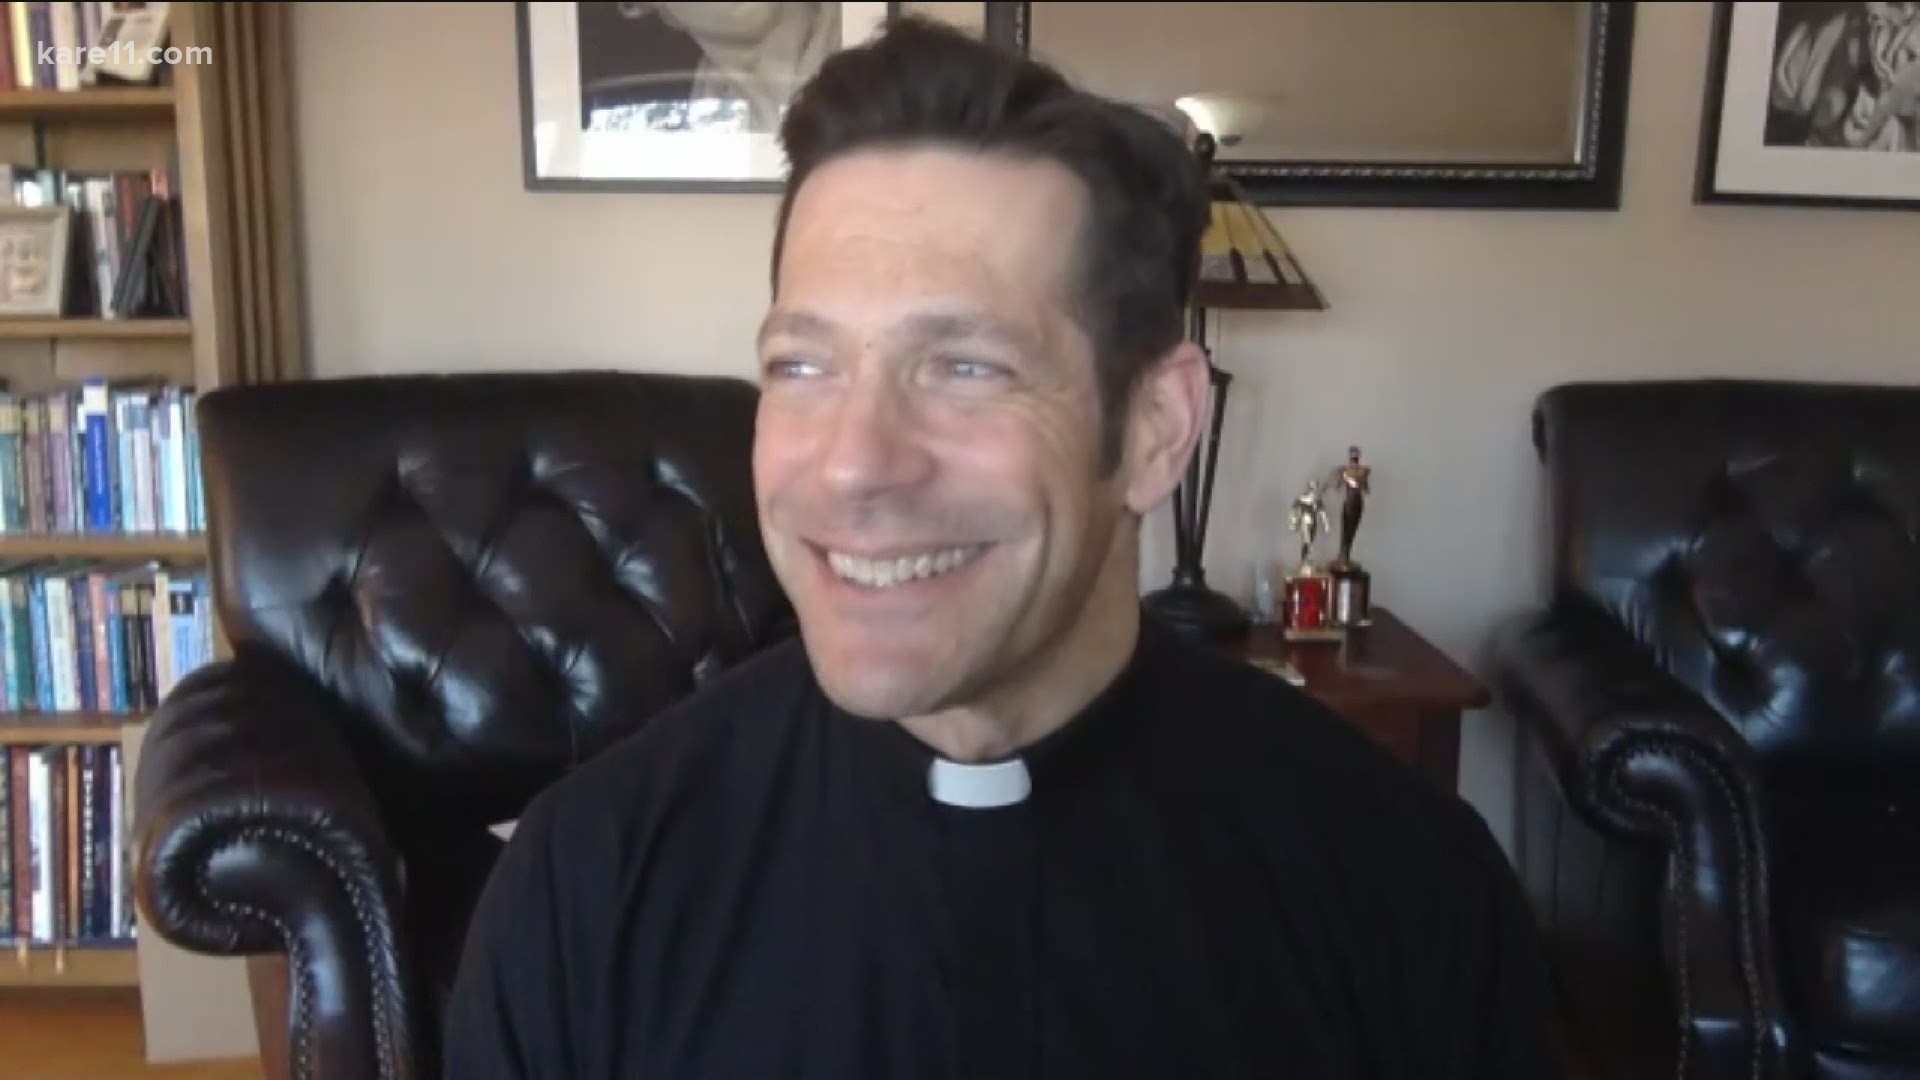 KARE 11's Bel Jensen talks to Father Mike Schmitz, the Duluth priest behind the hugely popular "Bible in a Year" podcast.